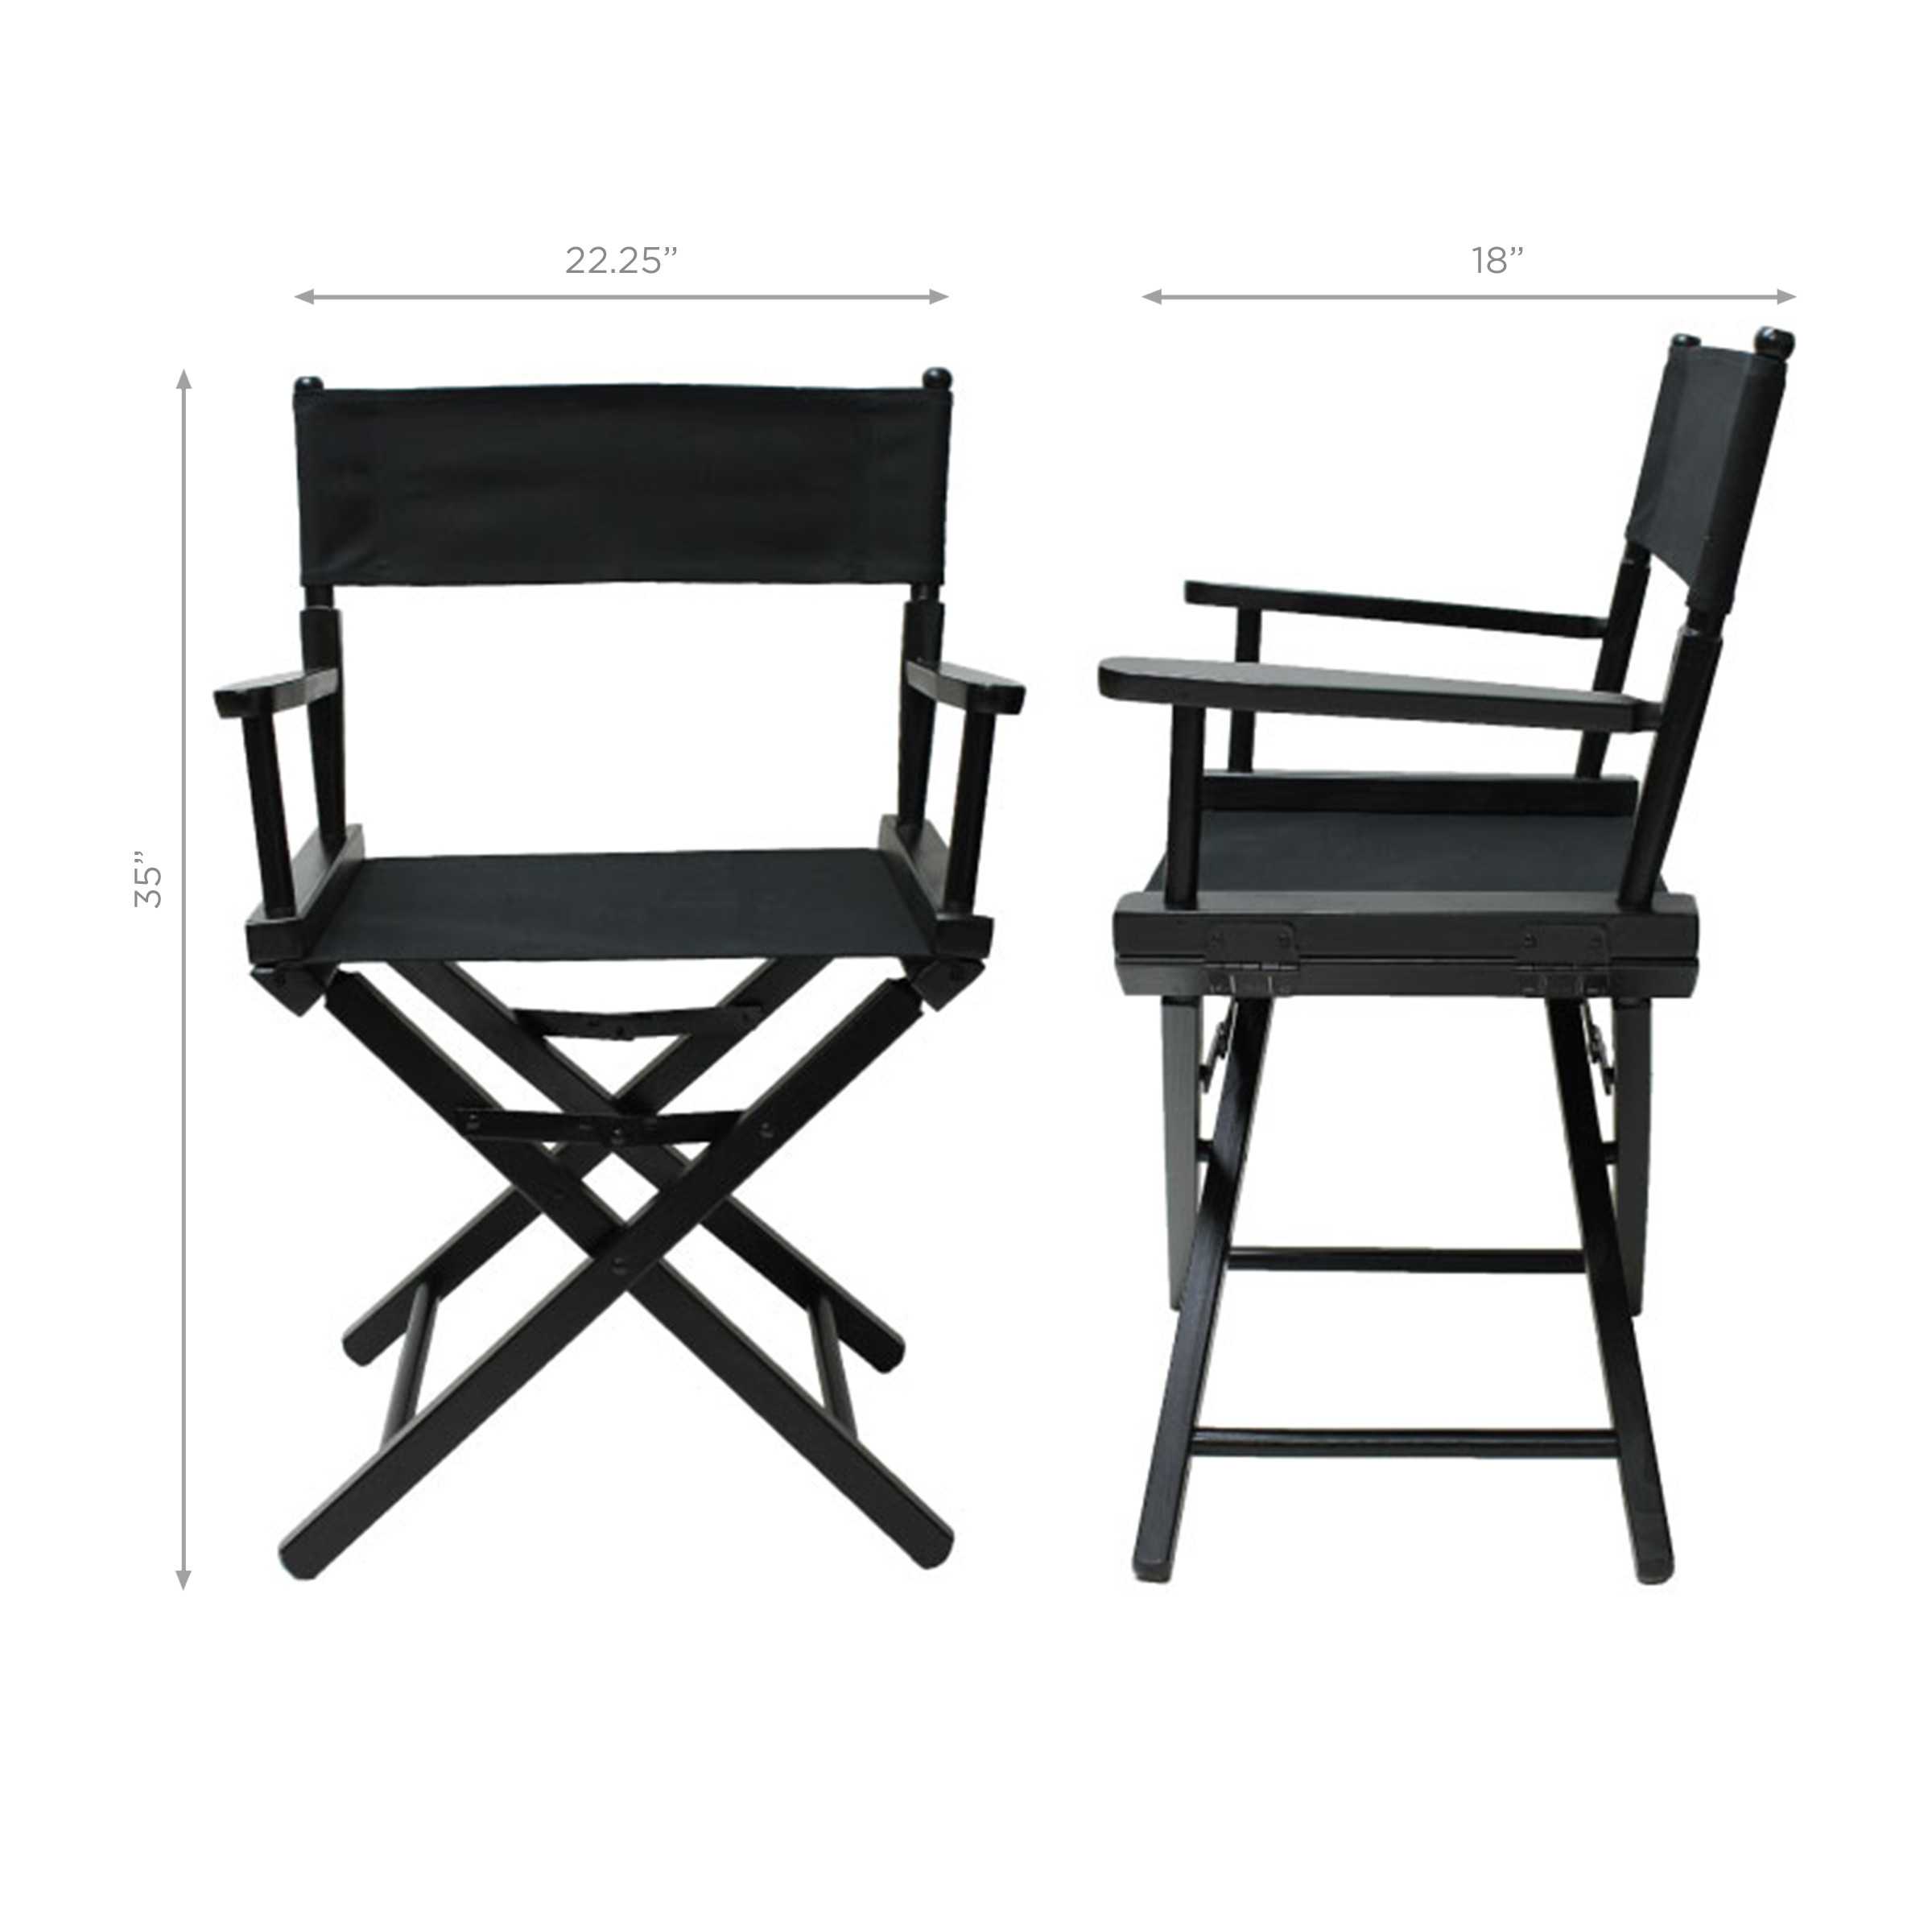 LOUISIANA STATE UNIVERSITY DIRECTORS CHAIR-TABLE HEIGHT